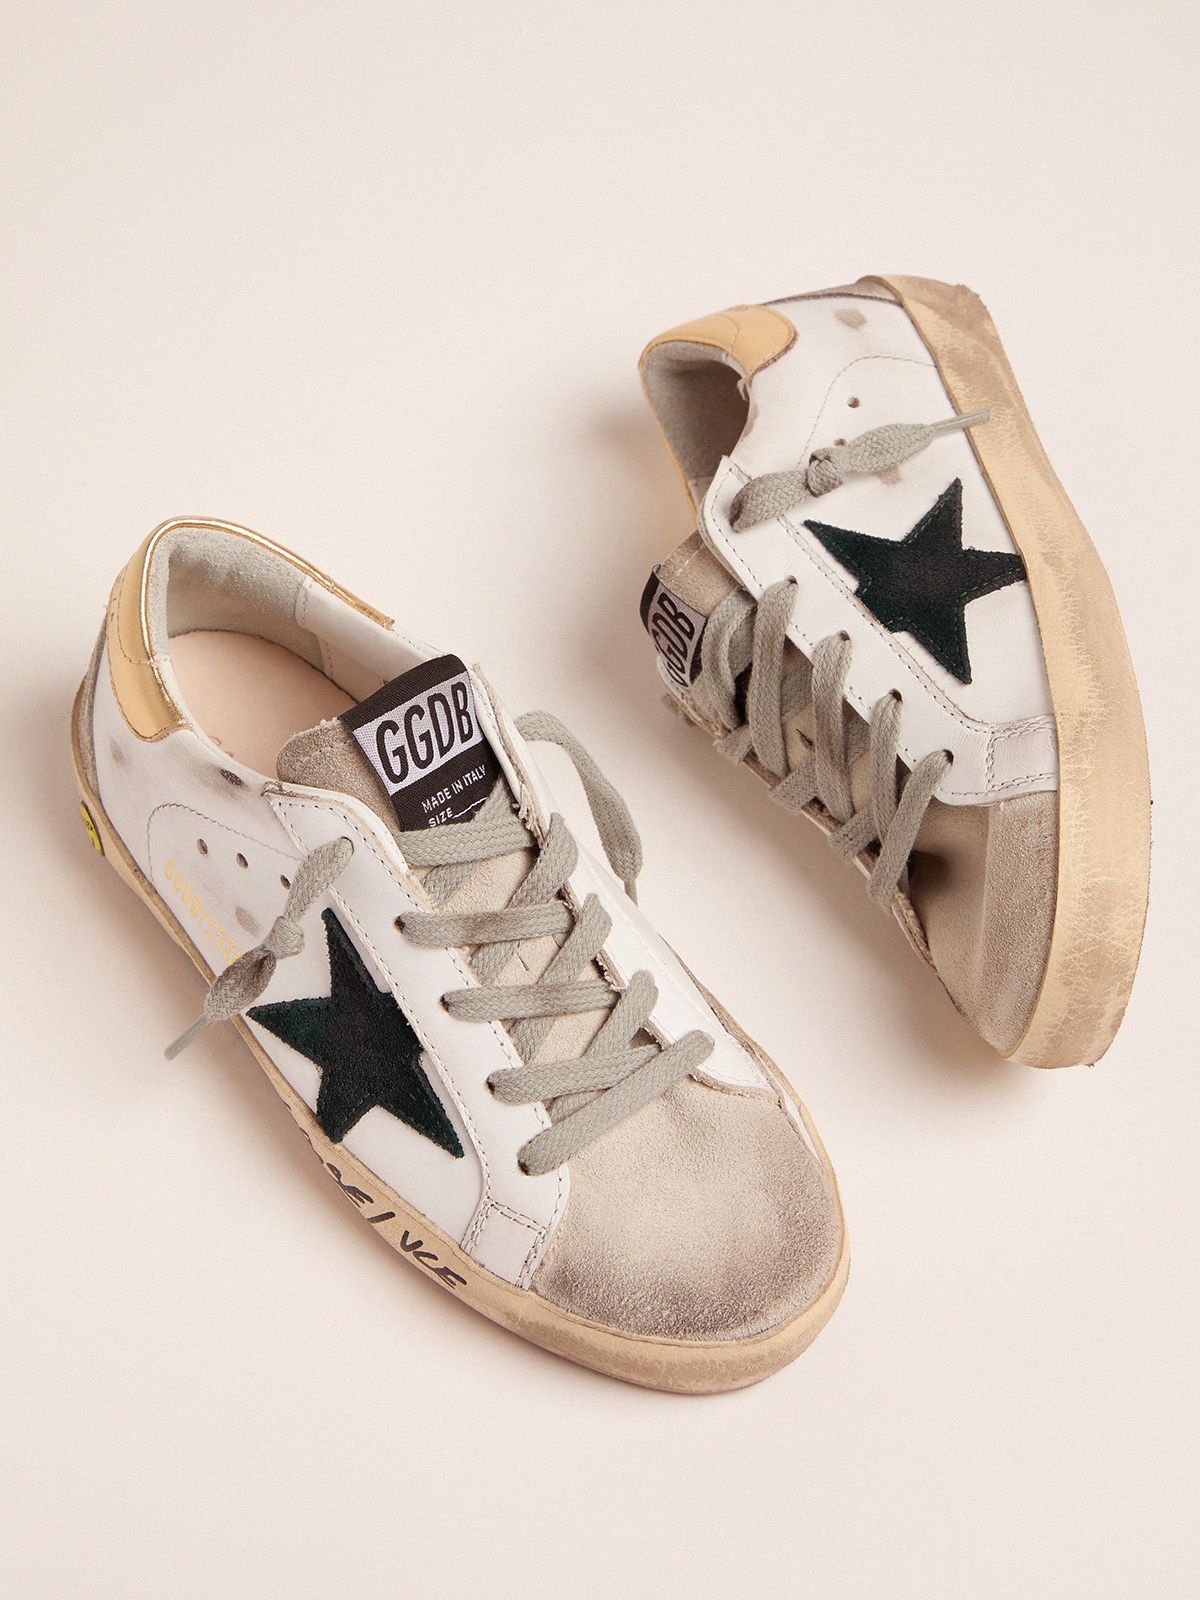 Super-Star sneakers with gold heel tab and handwritten lettering 